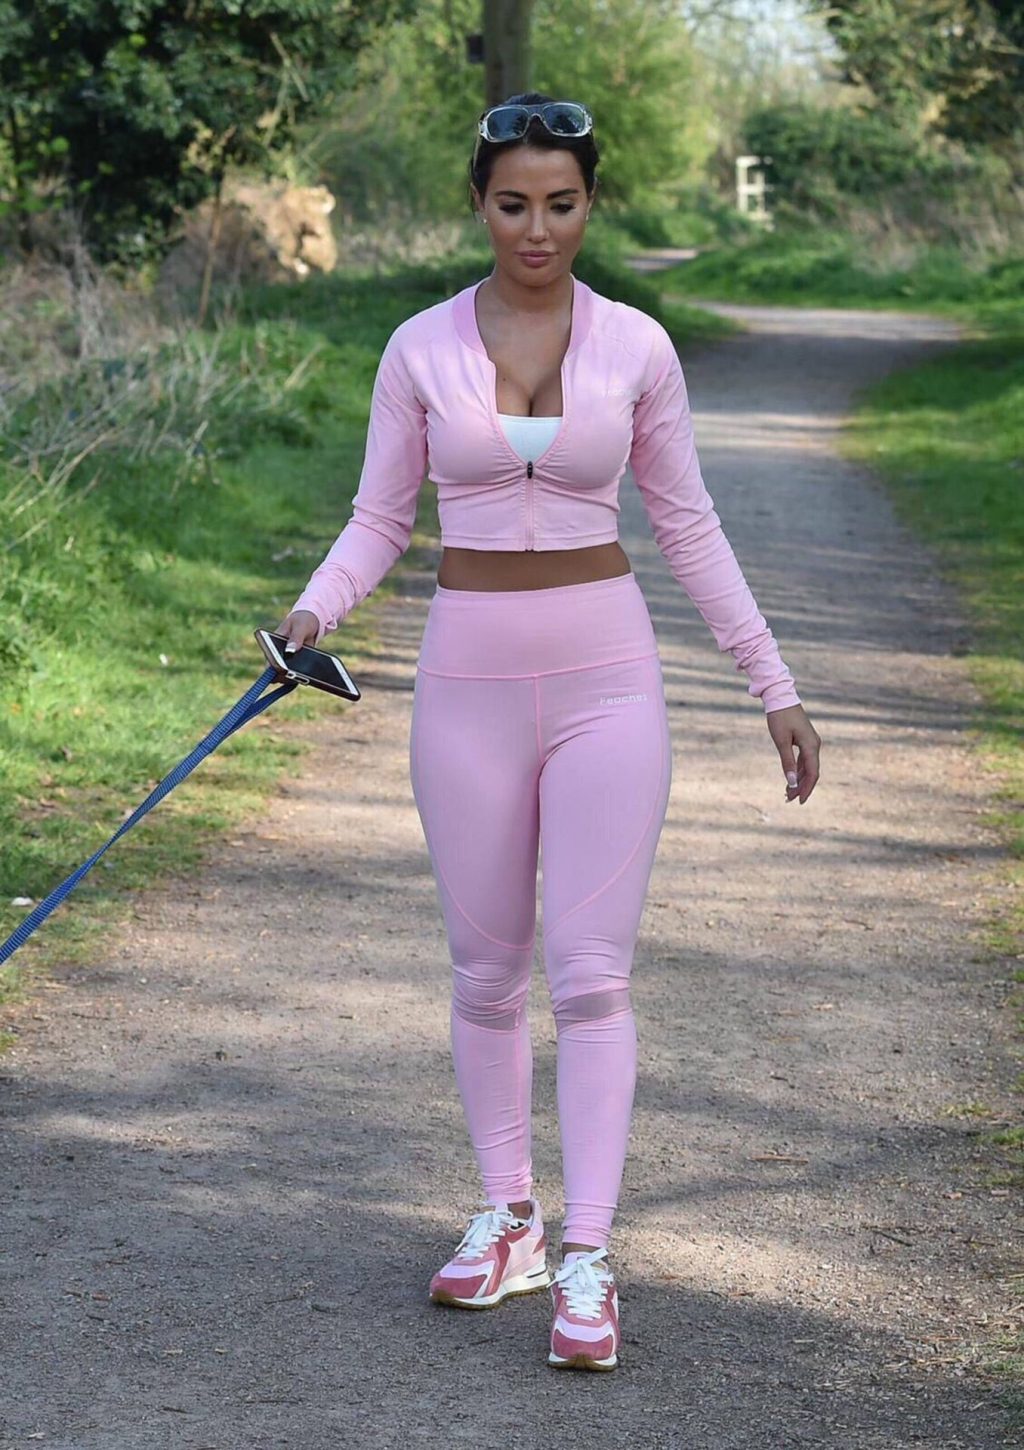 Yazmin Oukhellou Takes Her Dogs For a Walk in Essex (11 Photos)